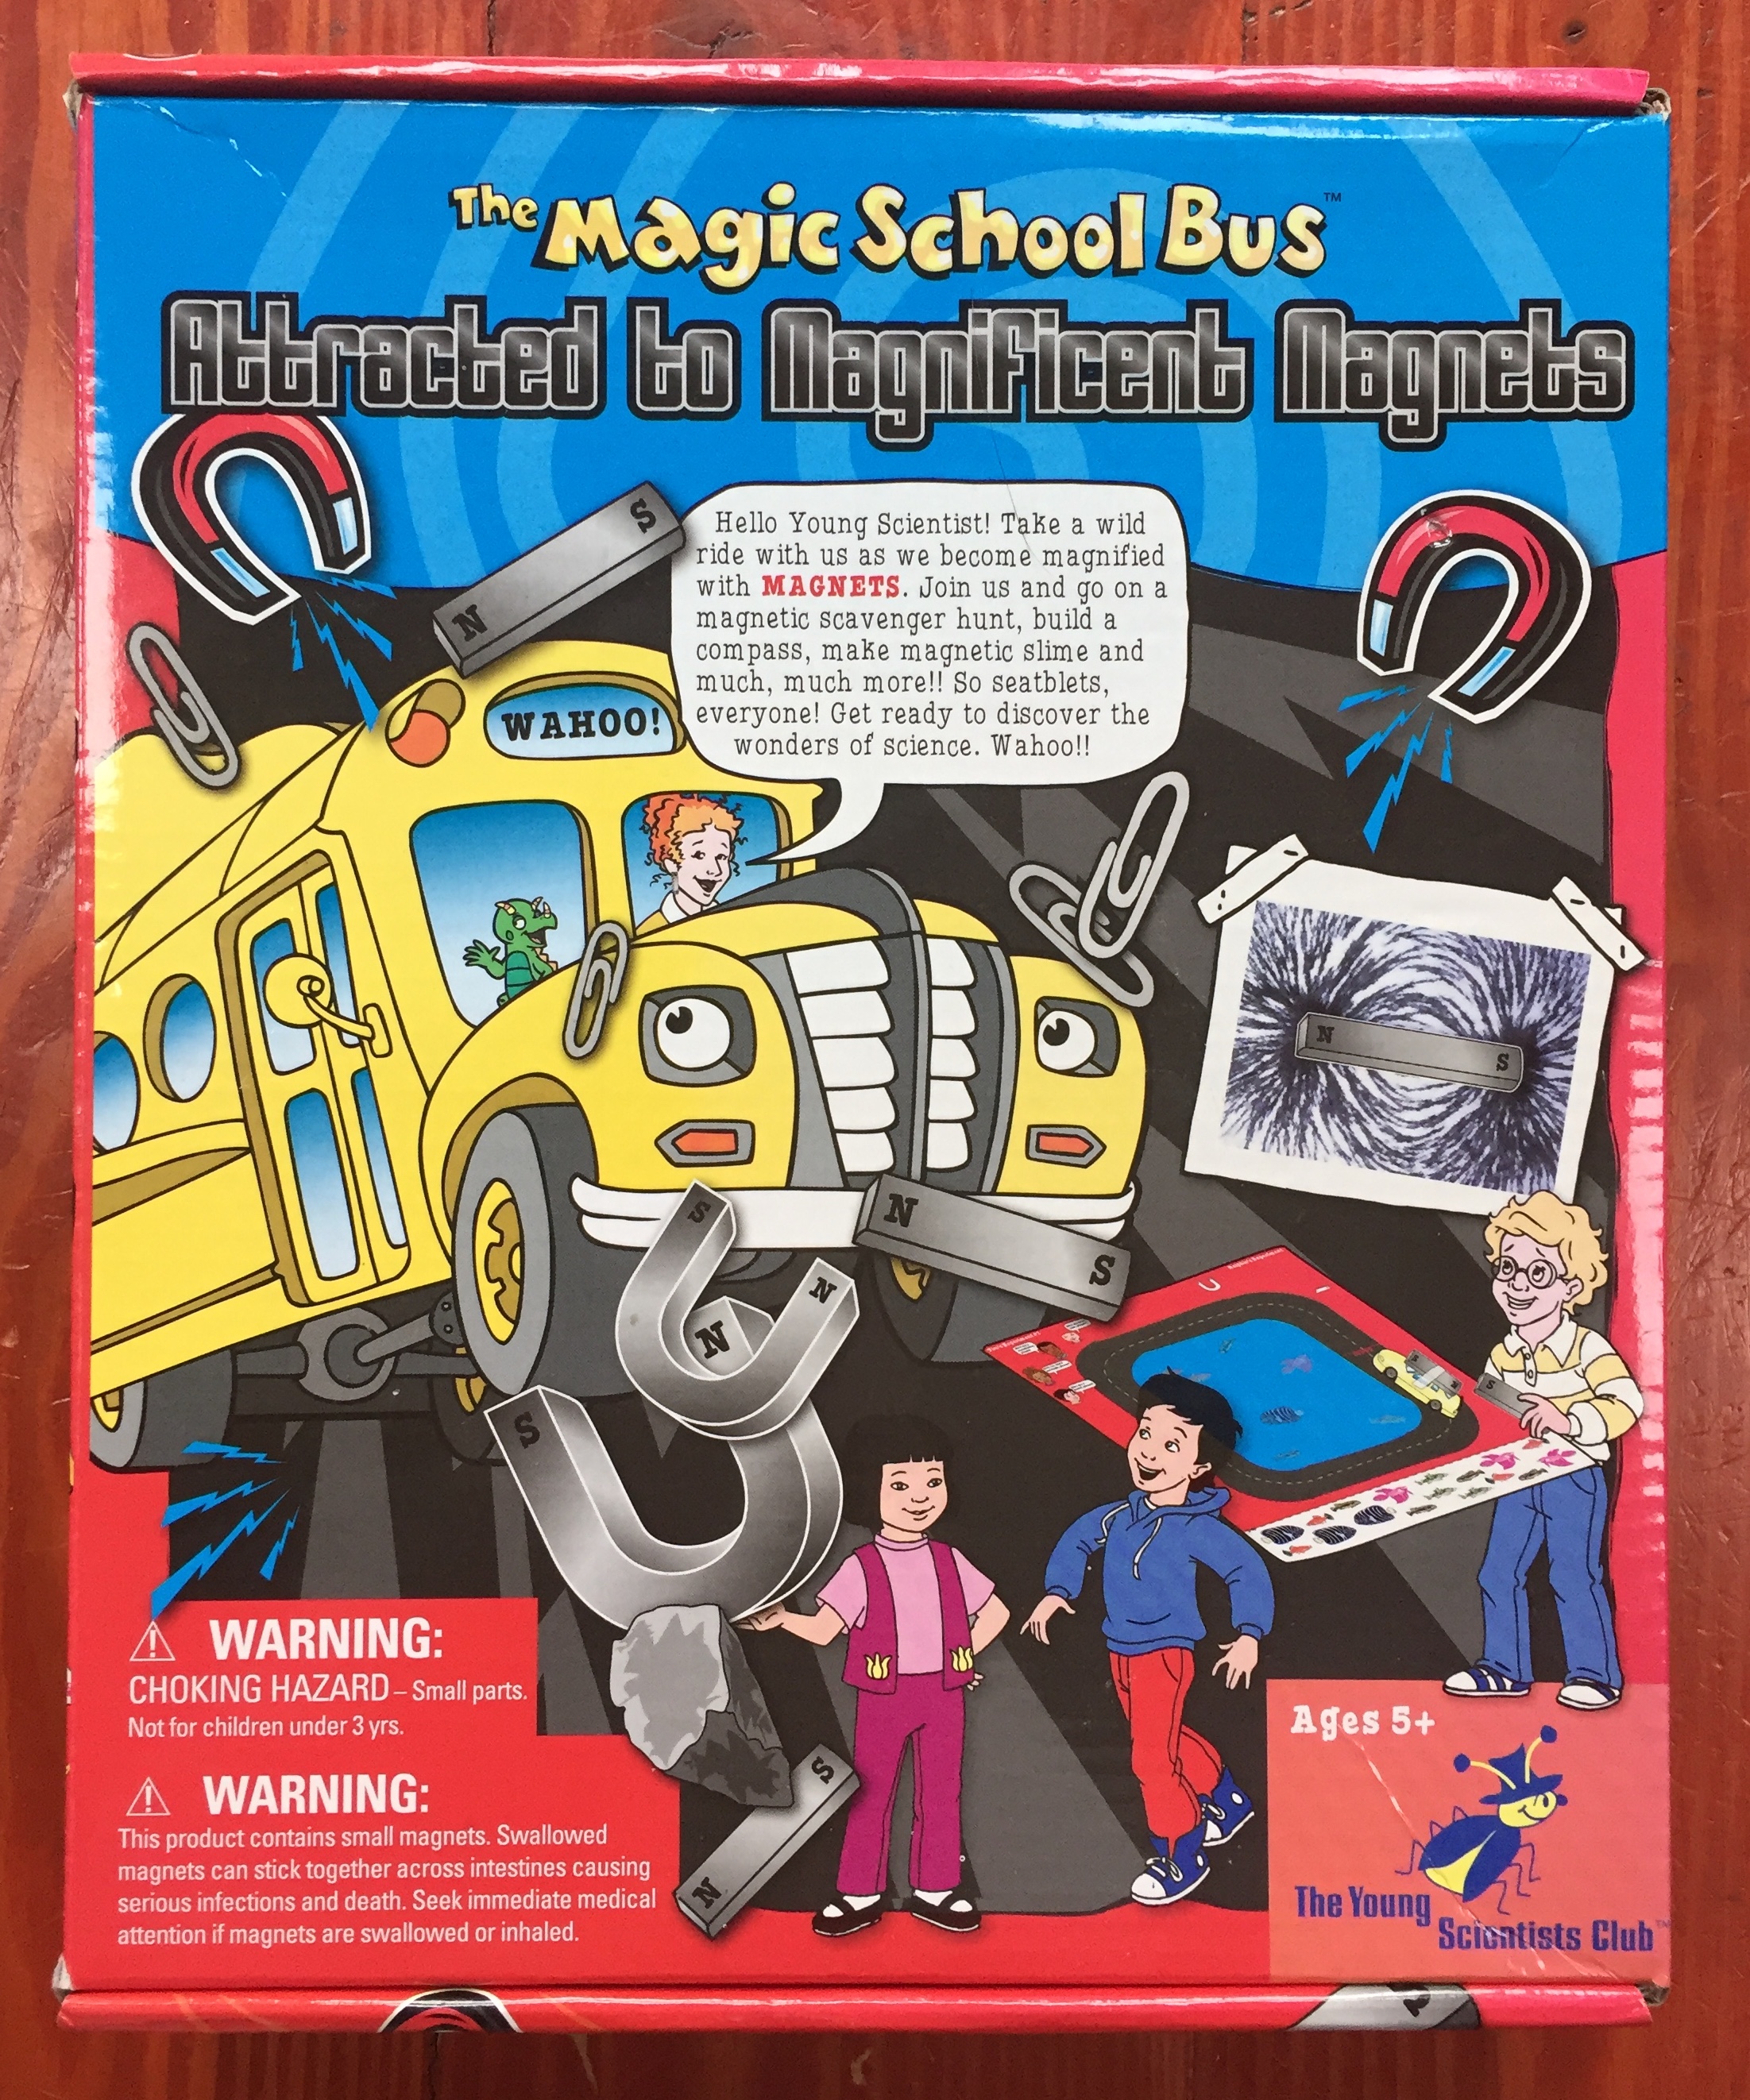 Magic School Bus Science Kit Attracted to Magnificent Magnets box front